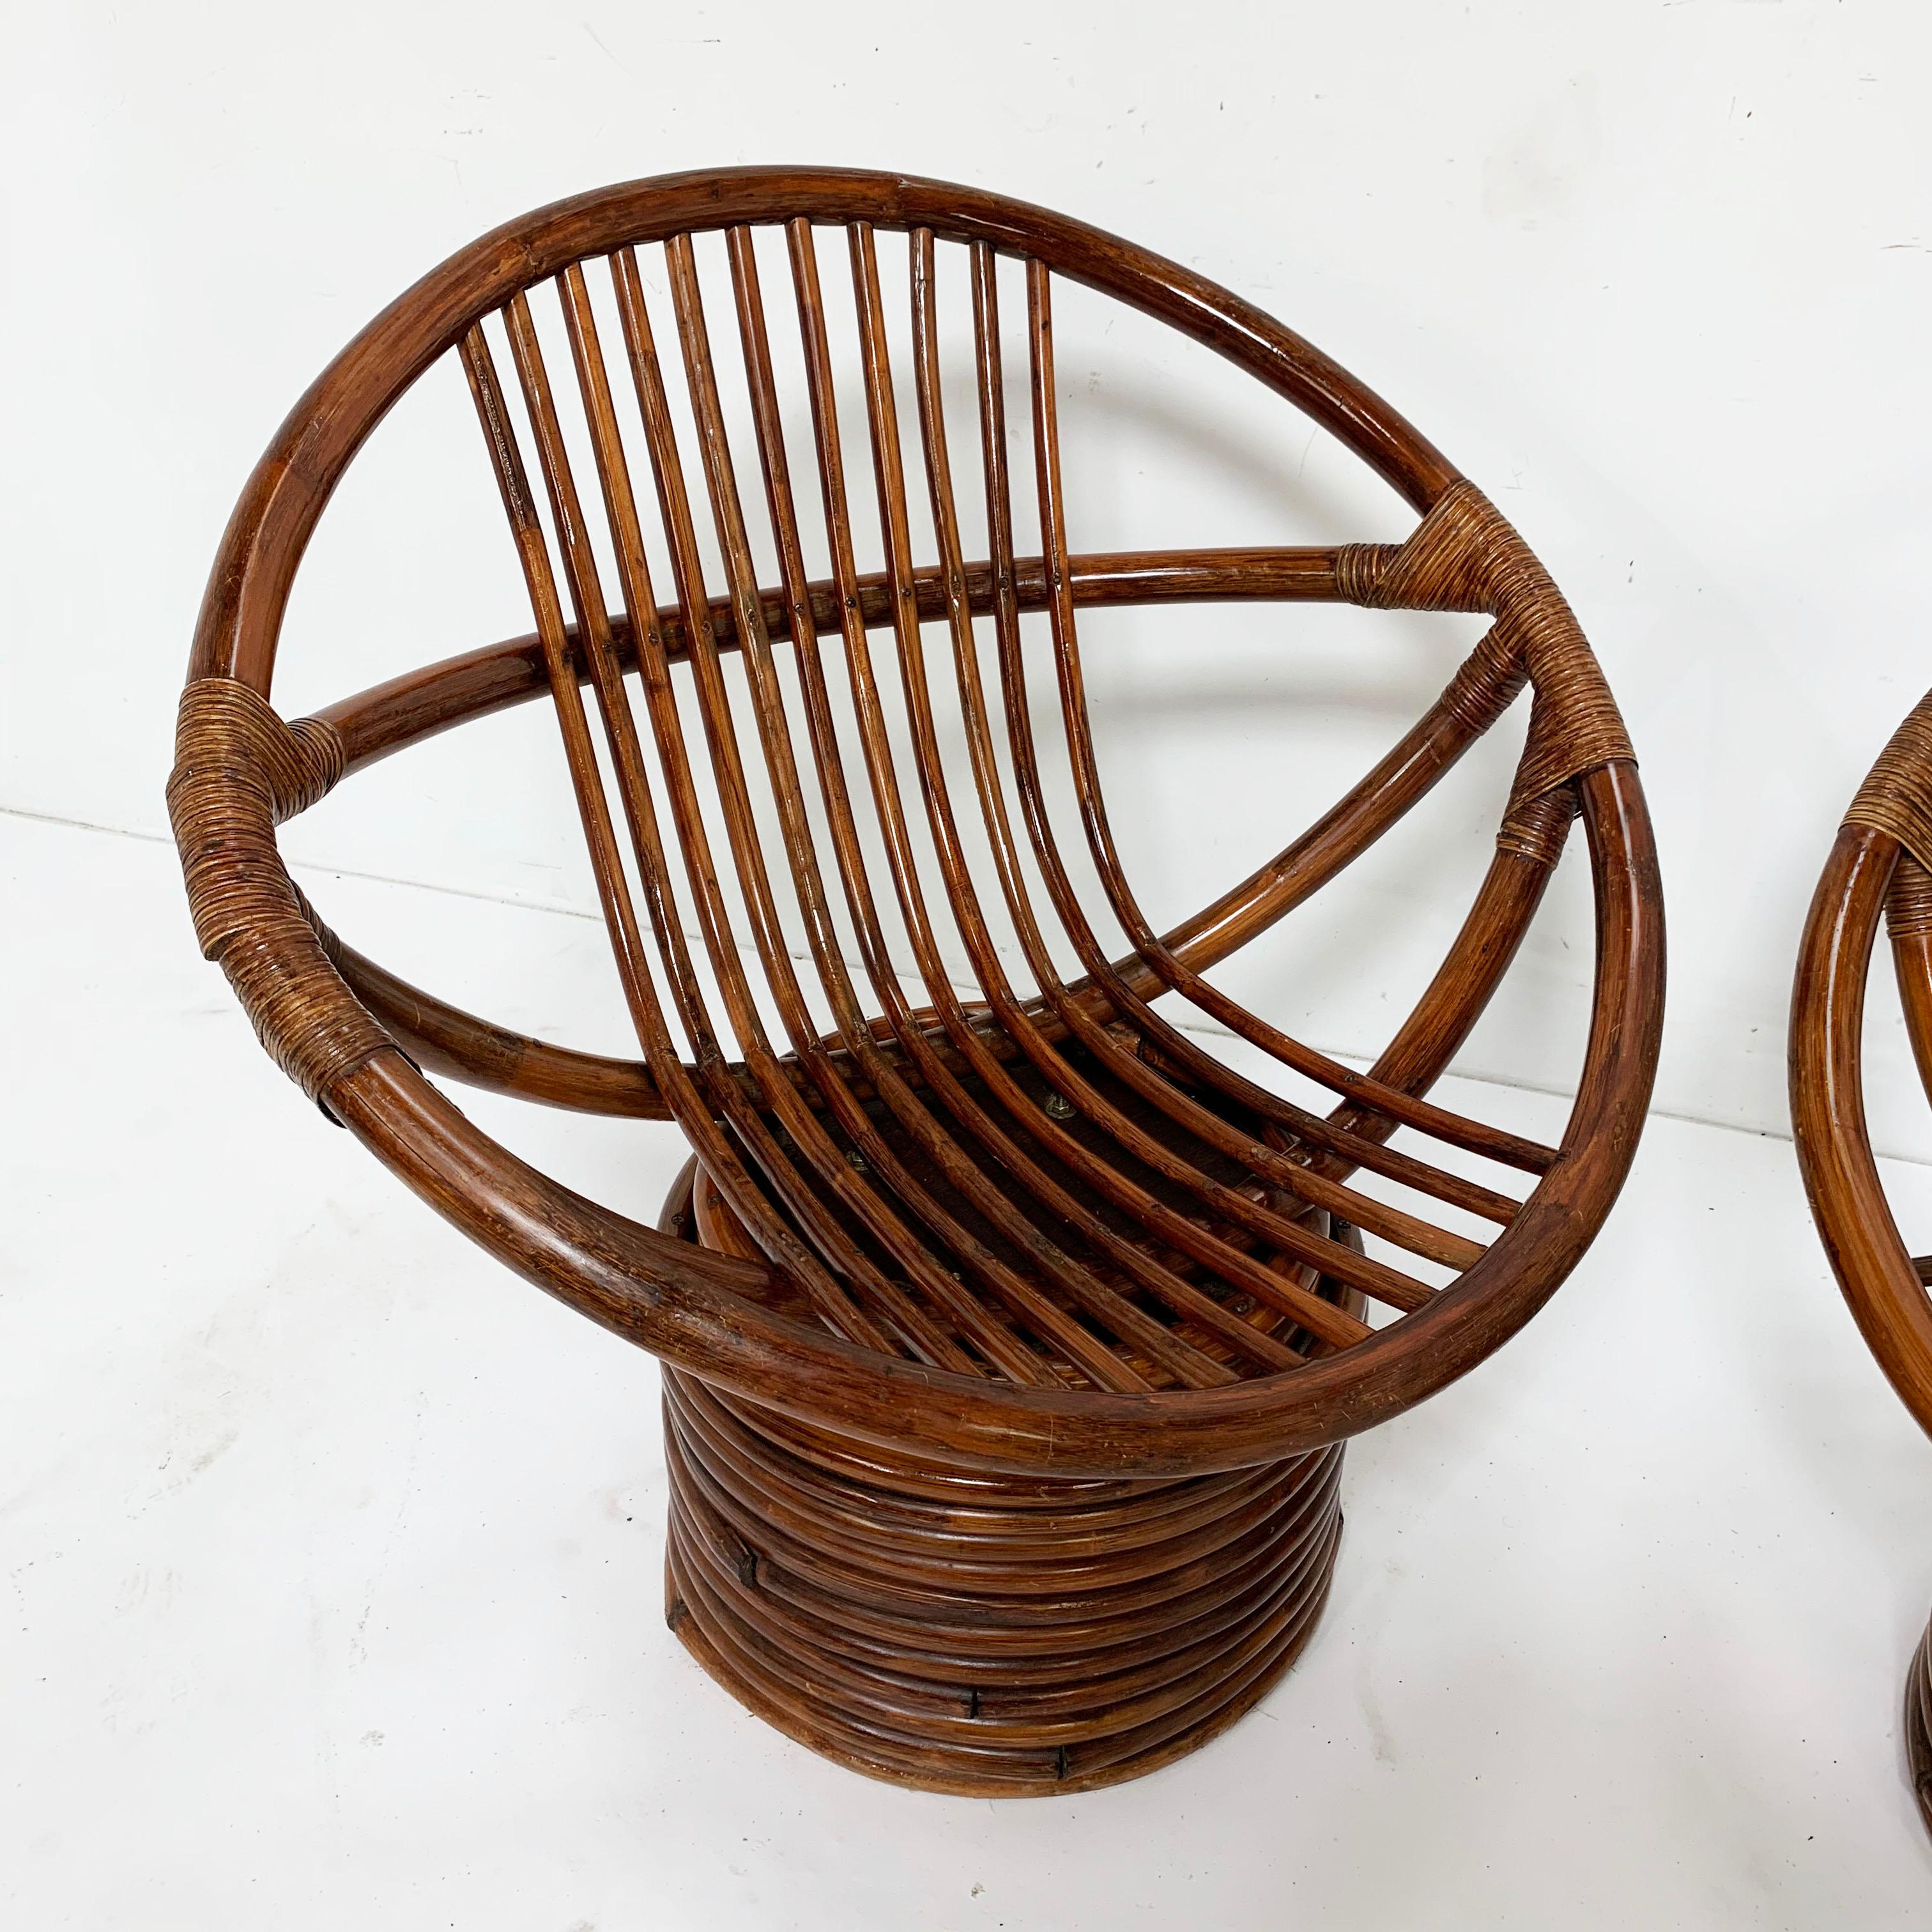 A pair of saucer-form swivel lounges in rattan, circa 1960s by Sun Products of Vernon, California. These vintage chairs have always resided safely indoors, and remain in excellent original condition. They’re extremely comfortable, even without seat